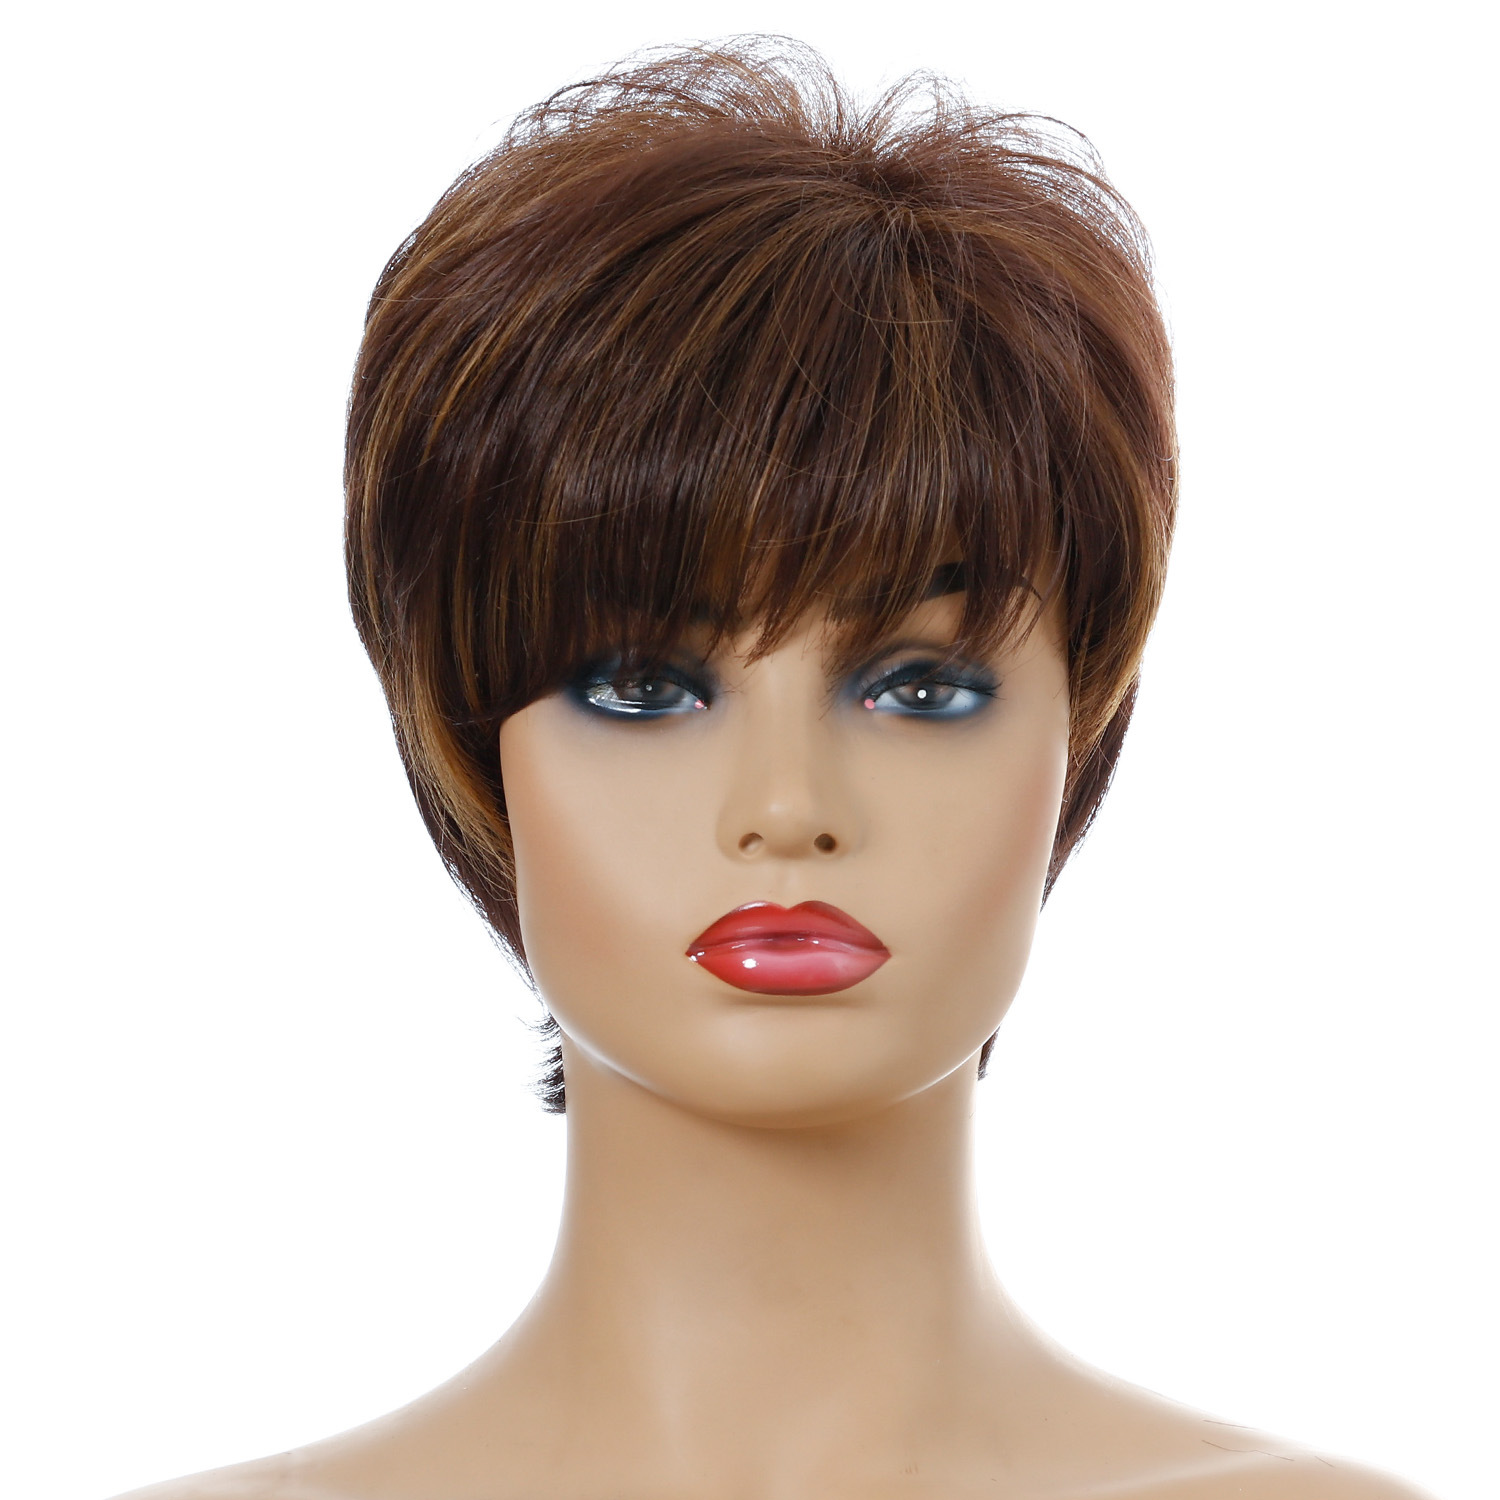 Stylish small curly wigs for women in light brown, showcasing short curly synthetic hair.